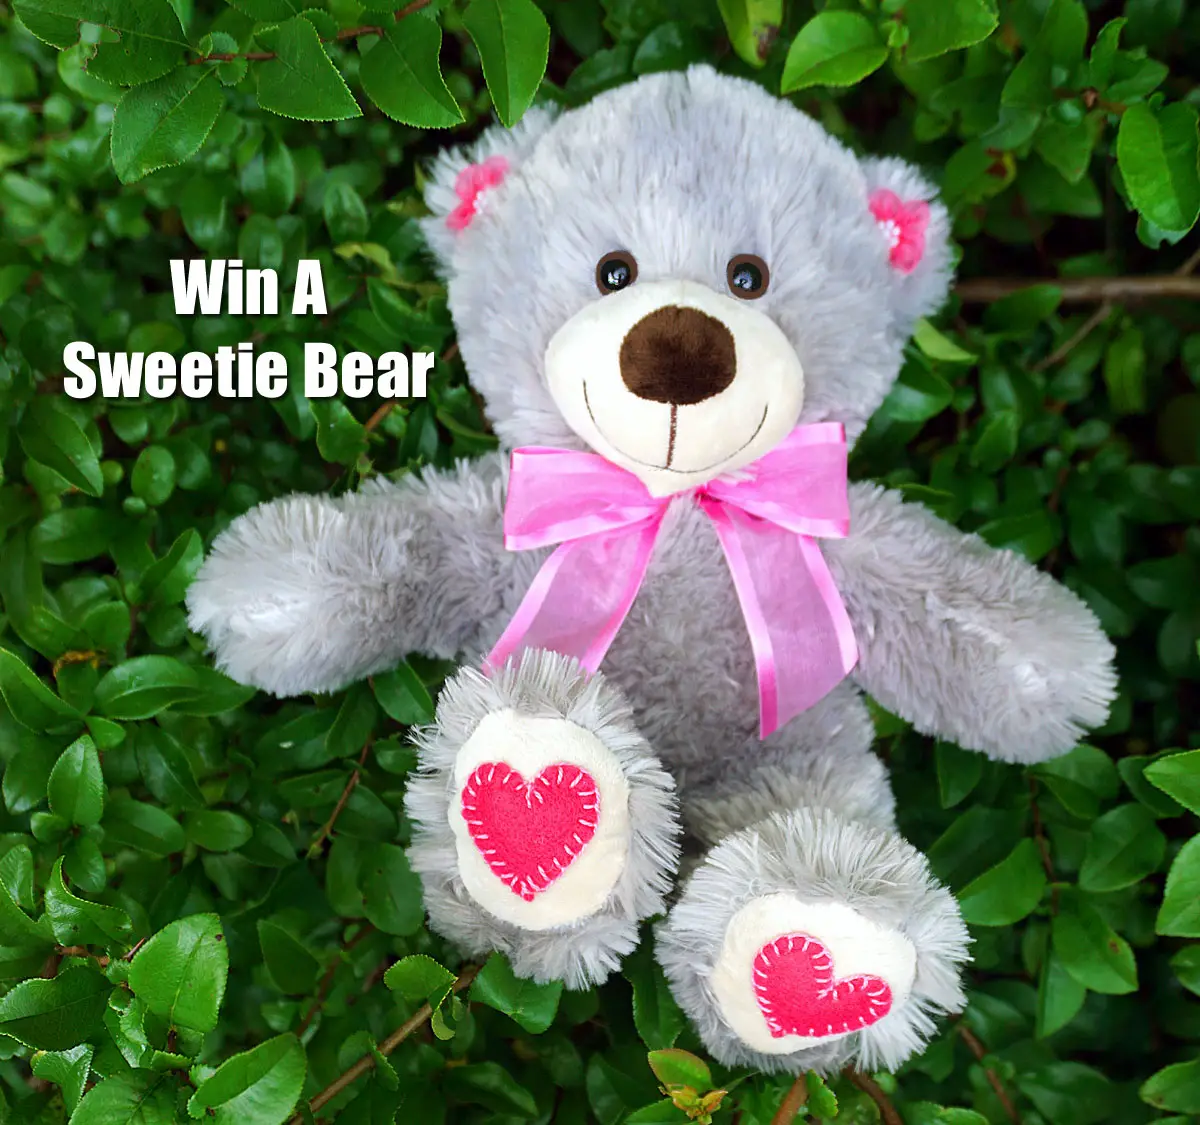 Enter to win a Sweetie Bear